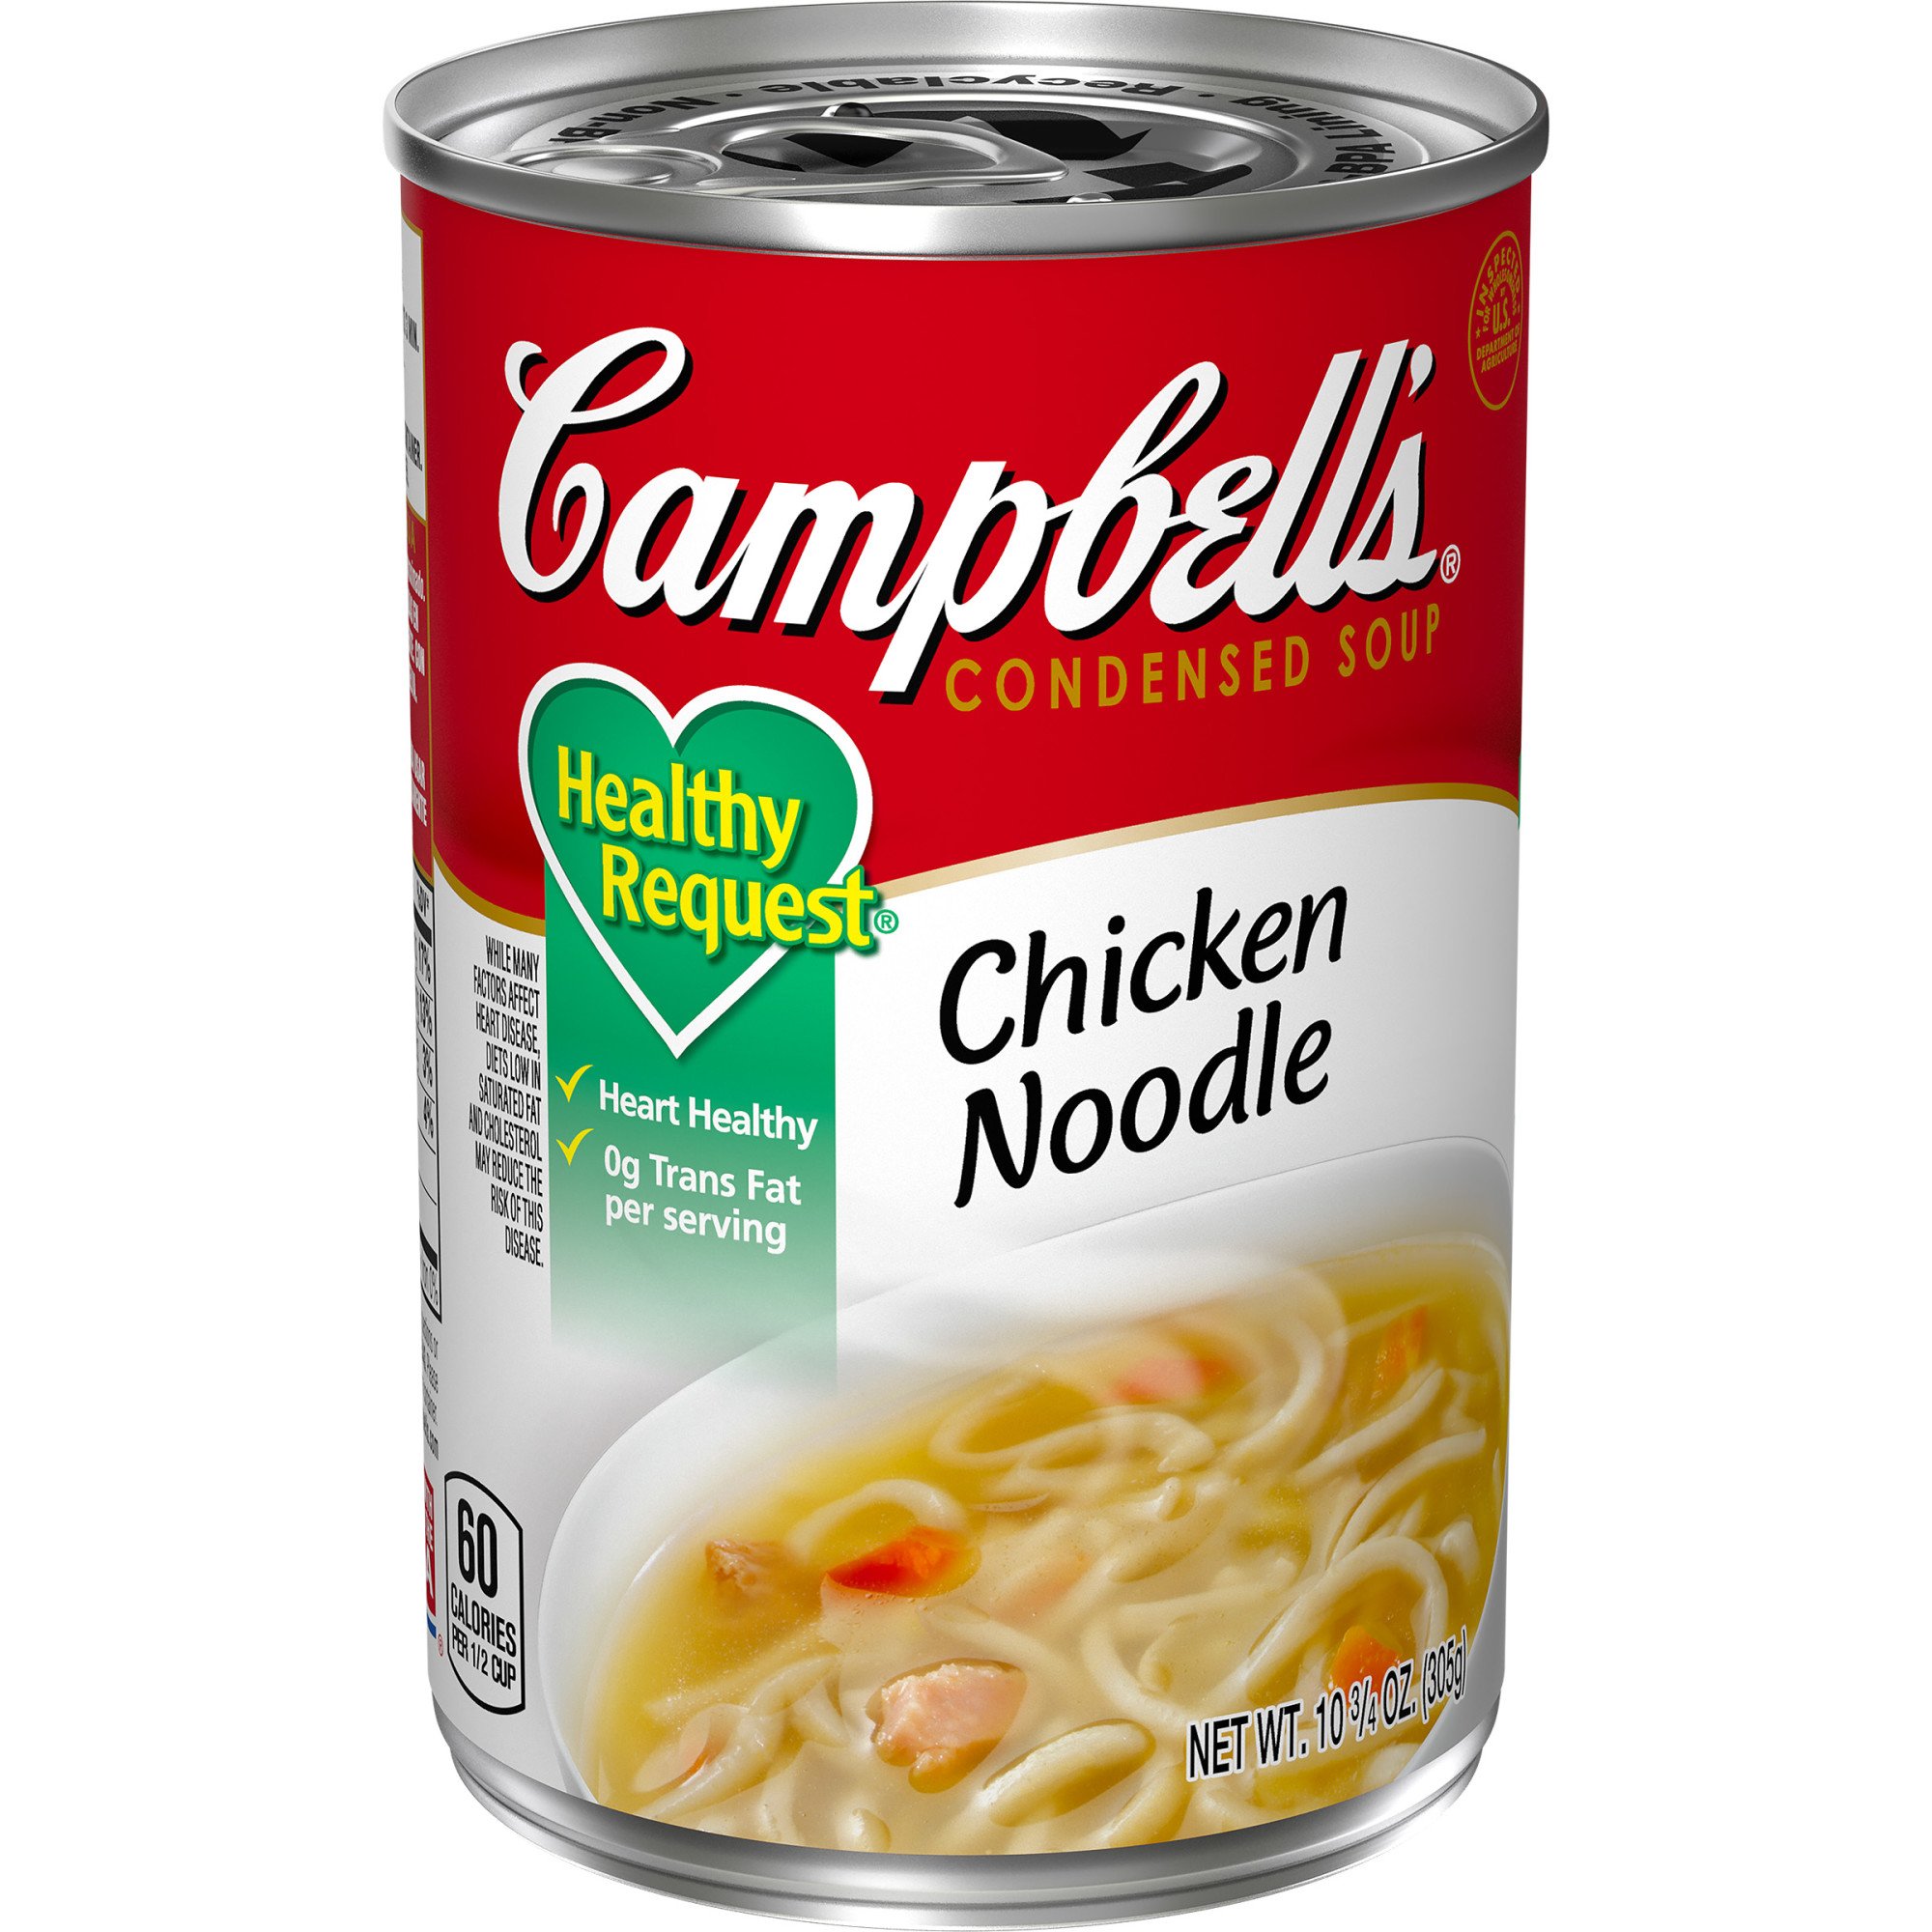 Campbells Condensed Healthy Request Chicken Noodle Soup ...